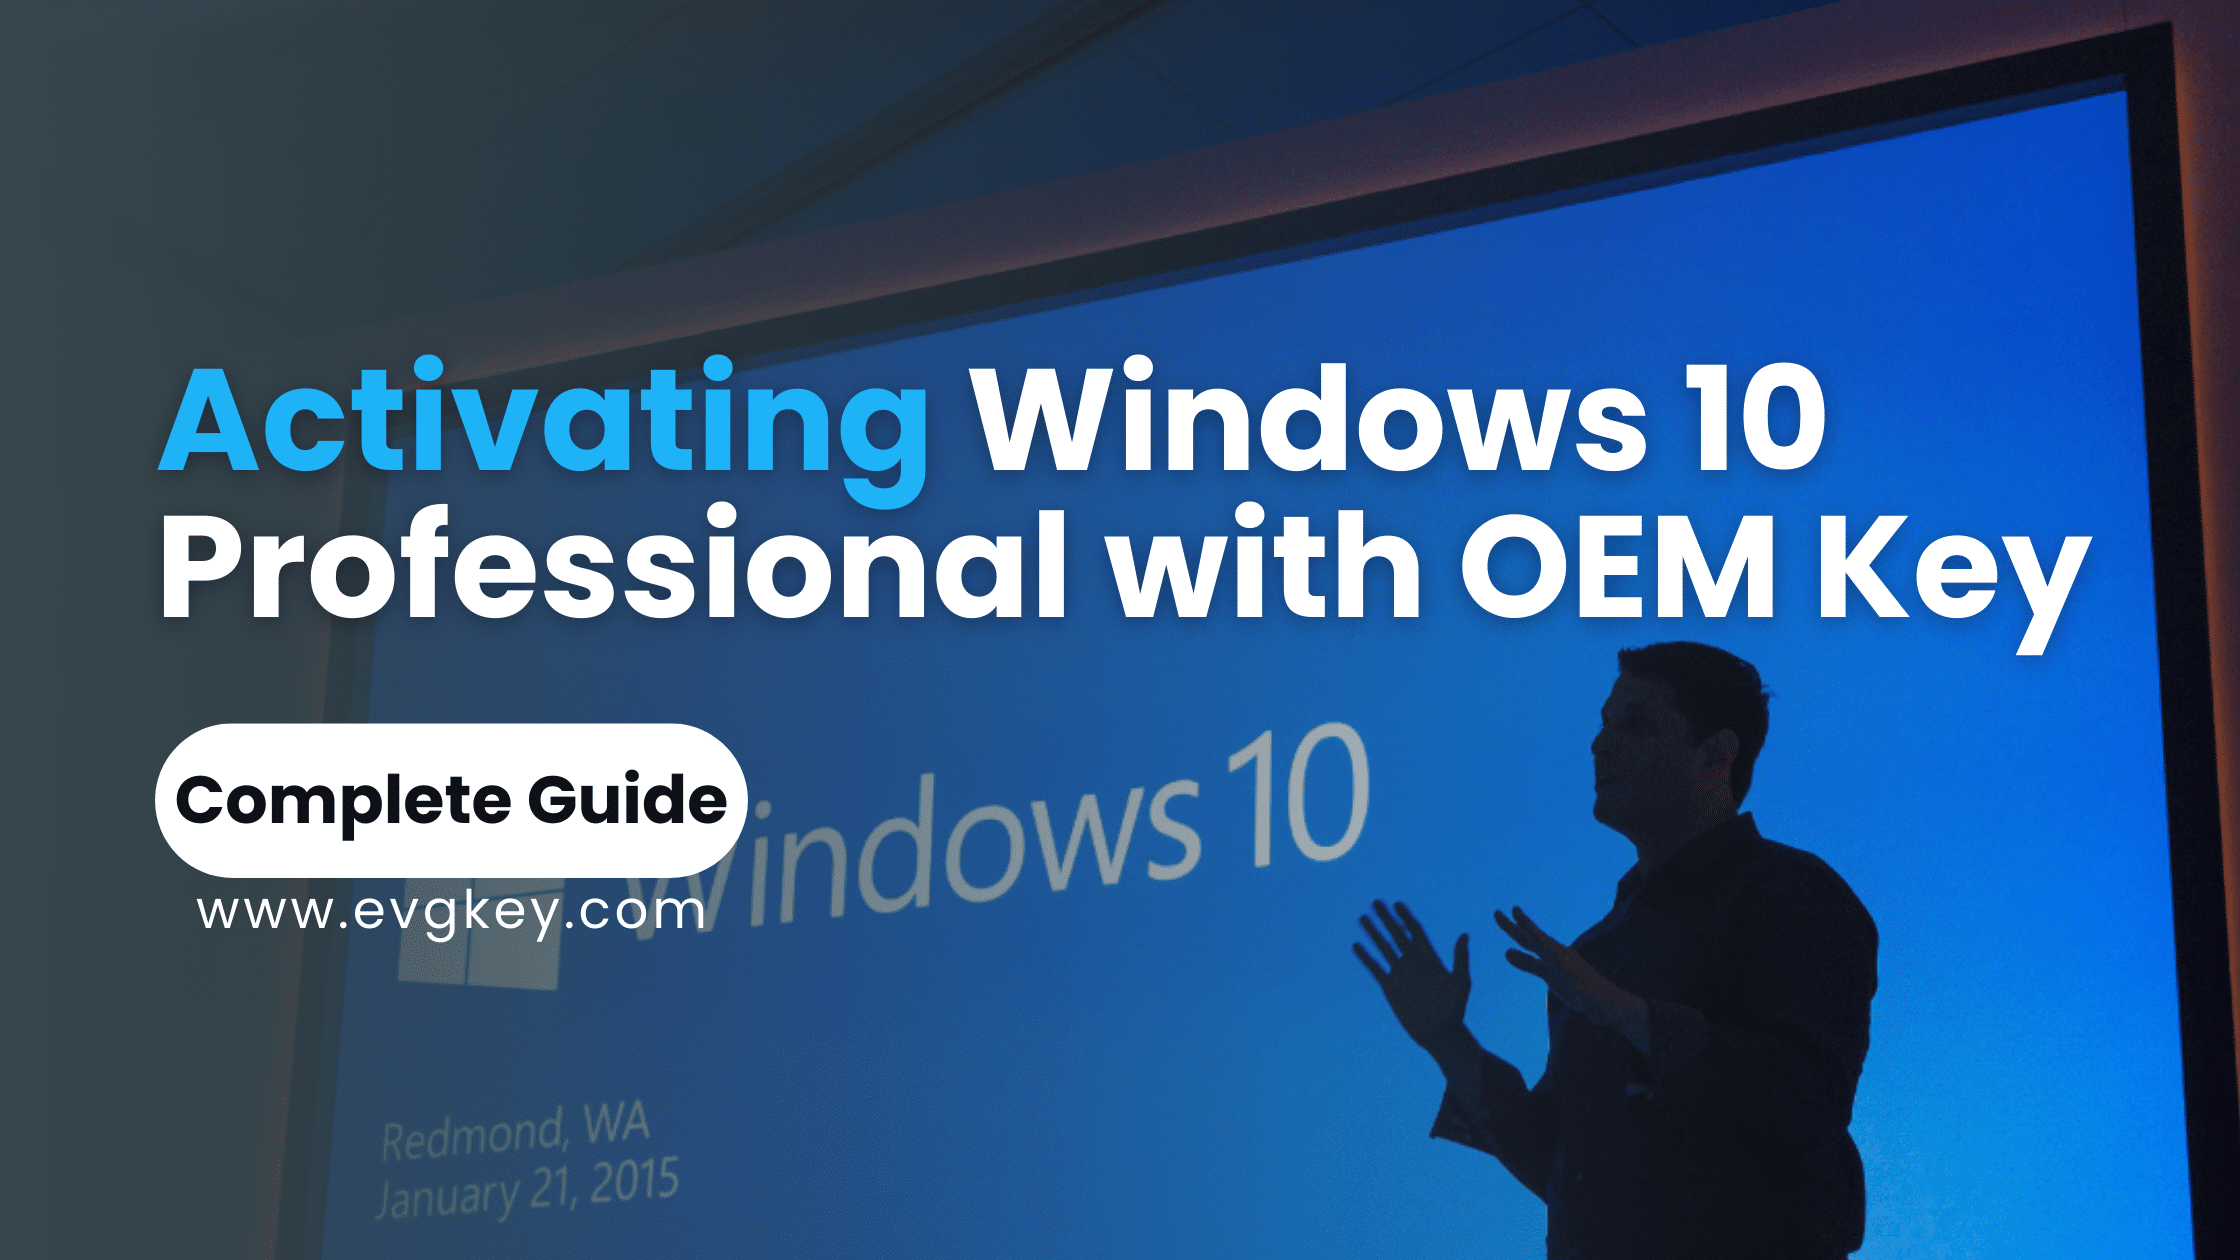 Activating Windows 10 Professional with OEM Key